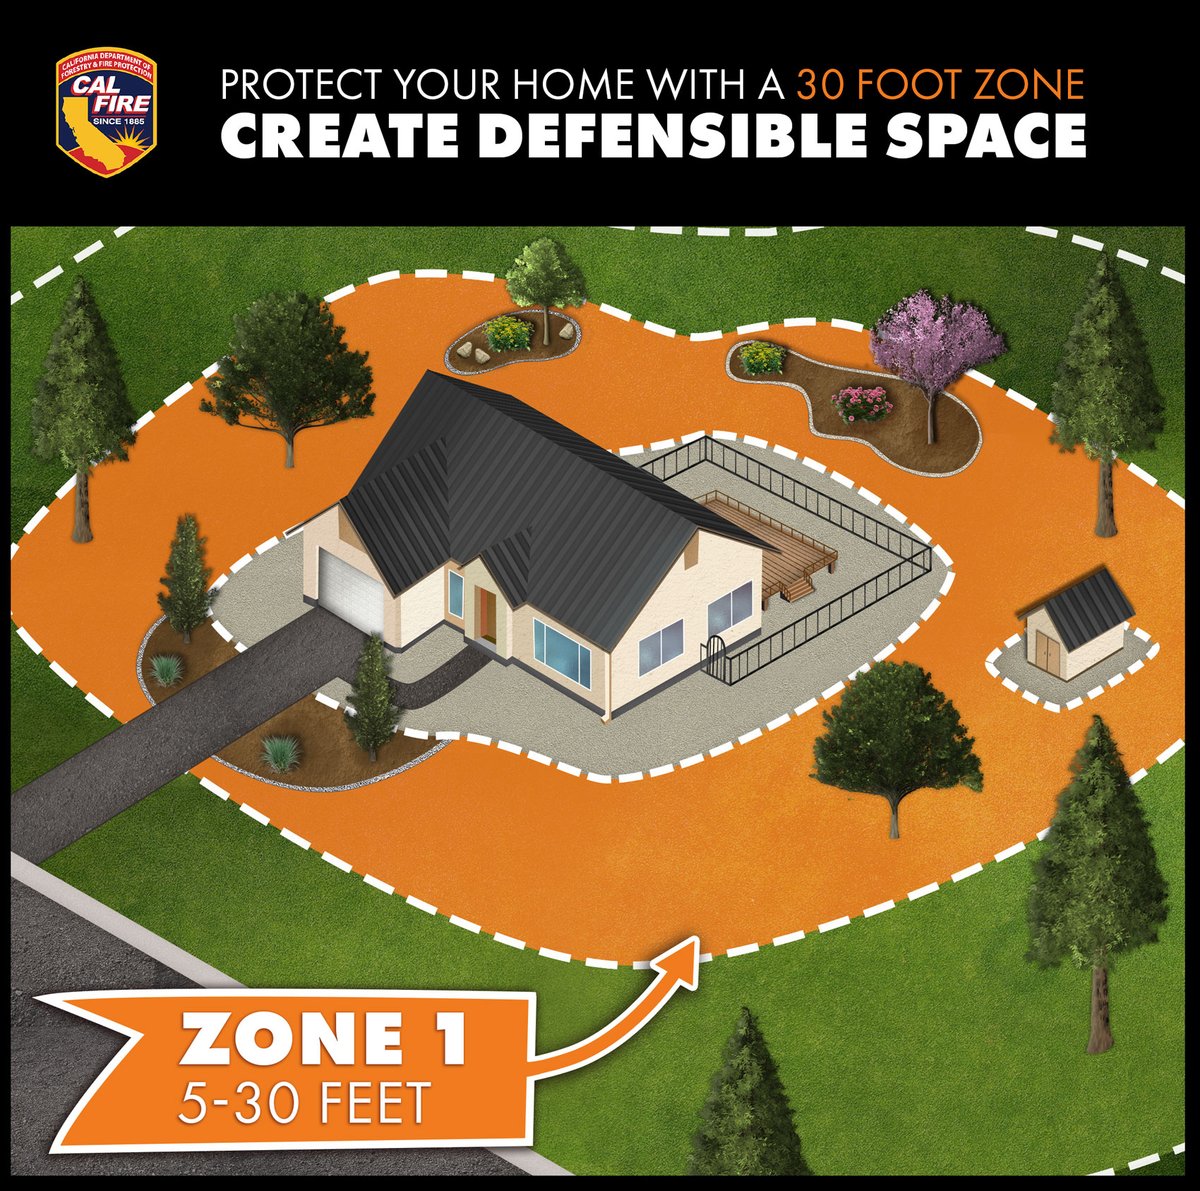 Defend your home by creating defensible space in different zones. In Zone 1, keep it clean and green within 30 feet, removing dead plants & leaves, trimming trees, & maintaining a 10-foot distance between branches. Learn more at ReadyforWildfire.org. #DefensibleSpace